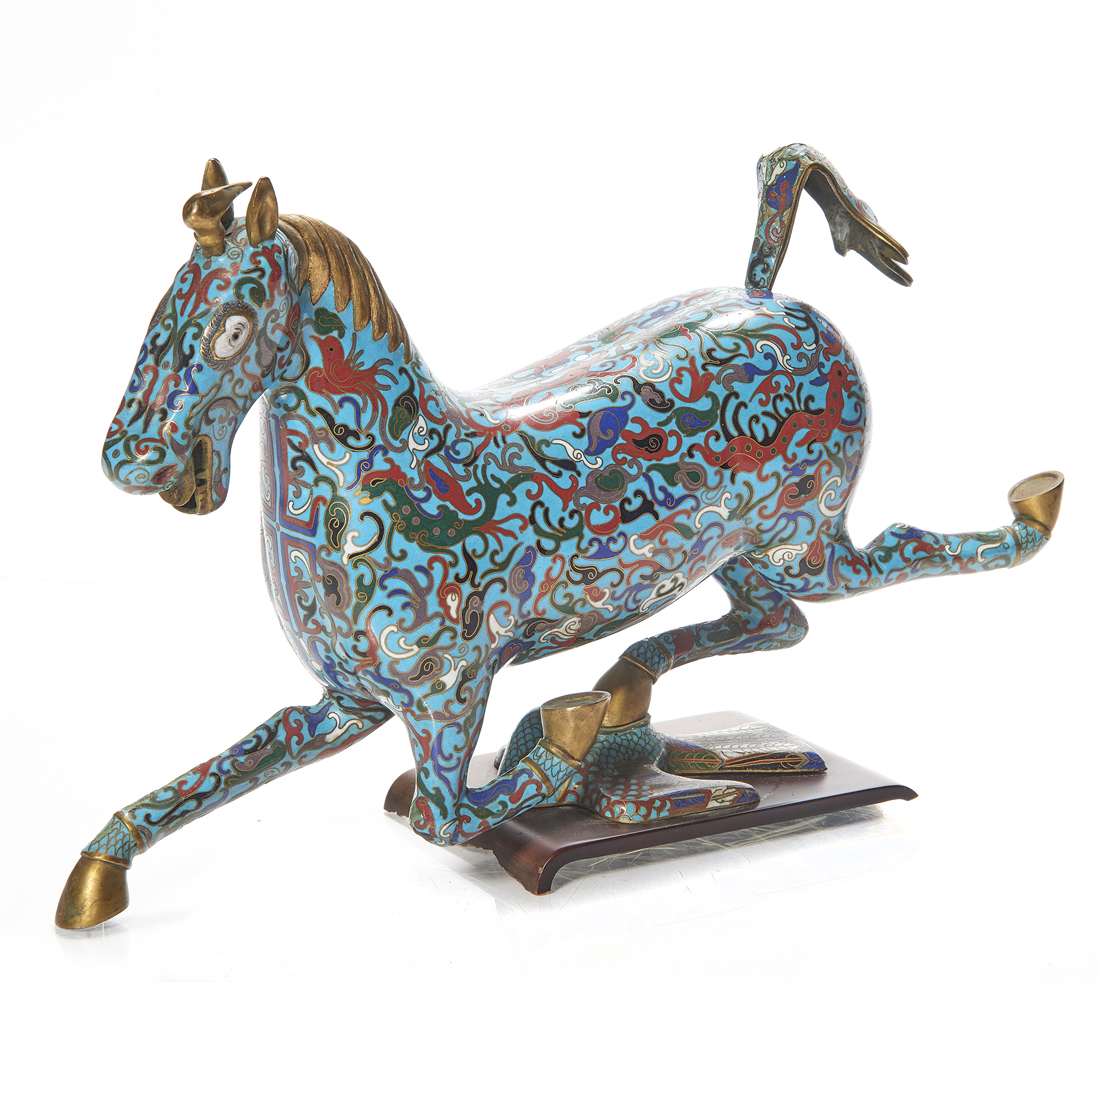 CHINESE CLOISONNE ENAMEL HORSE ON A